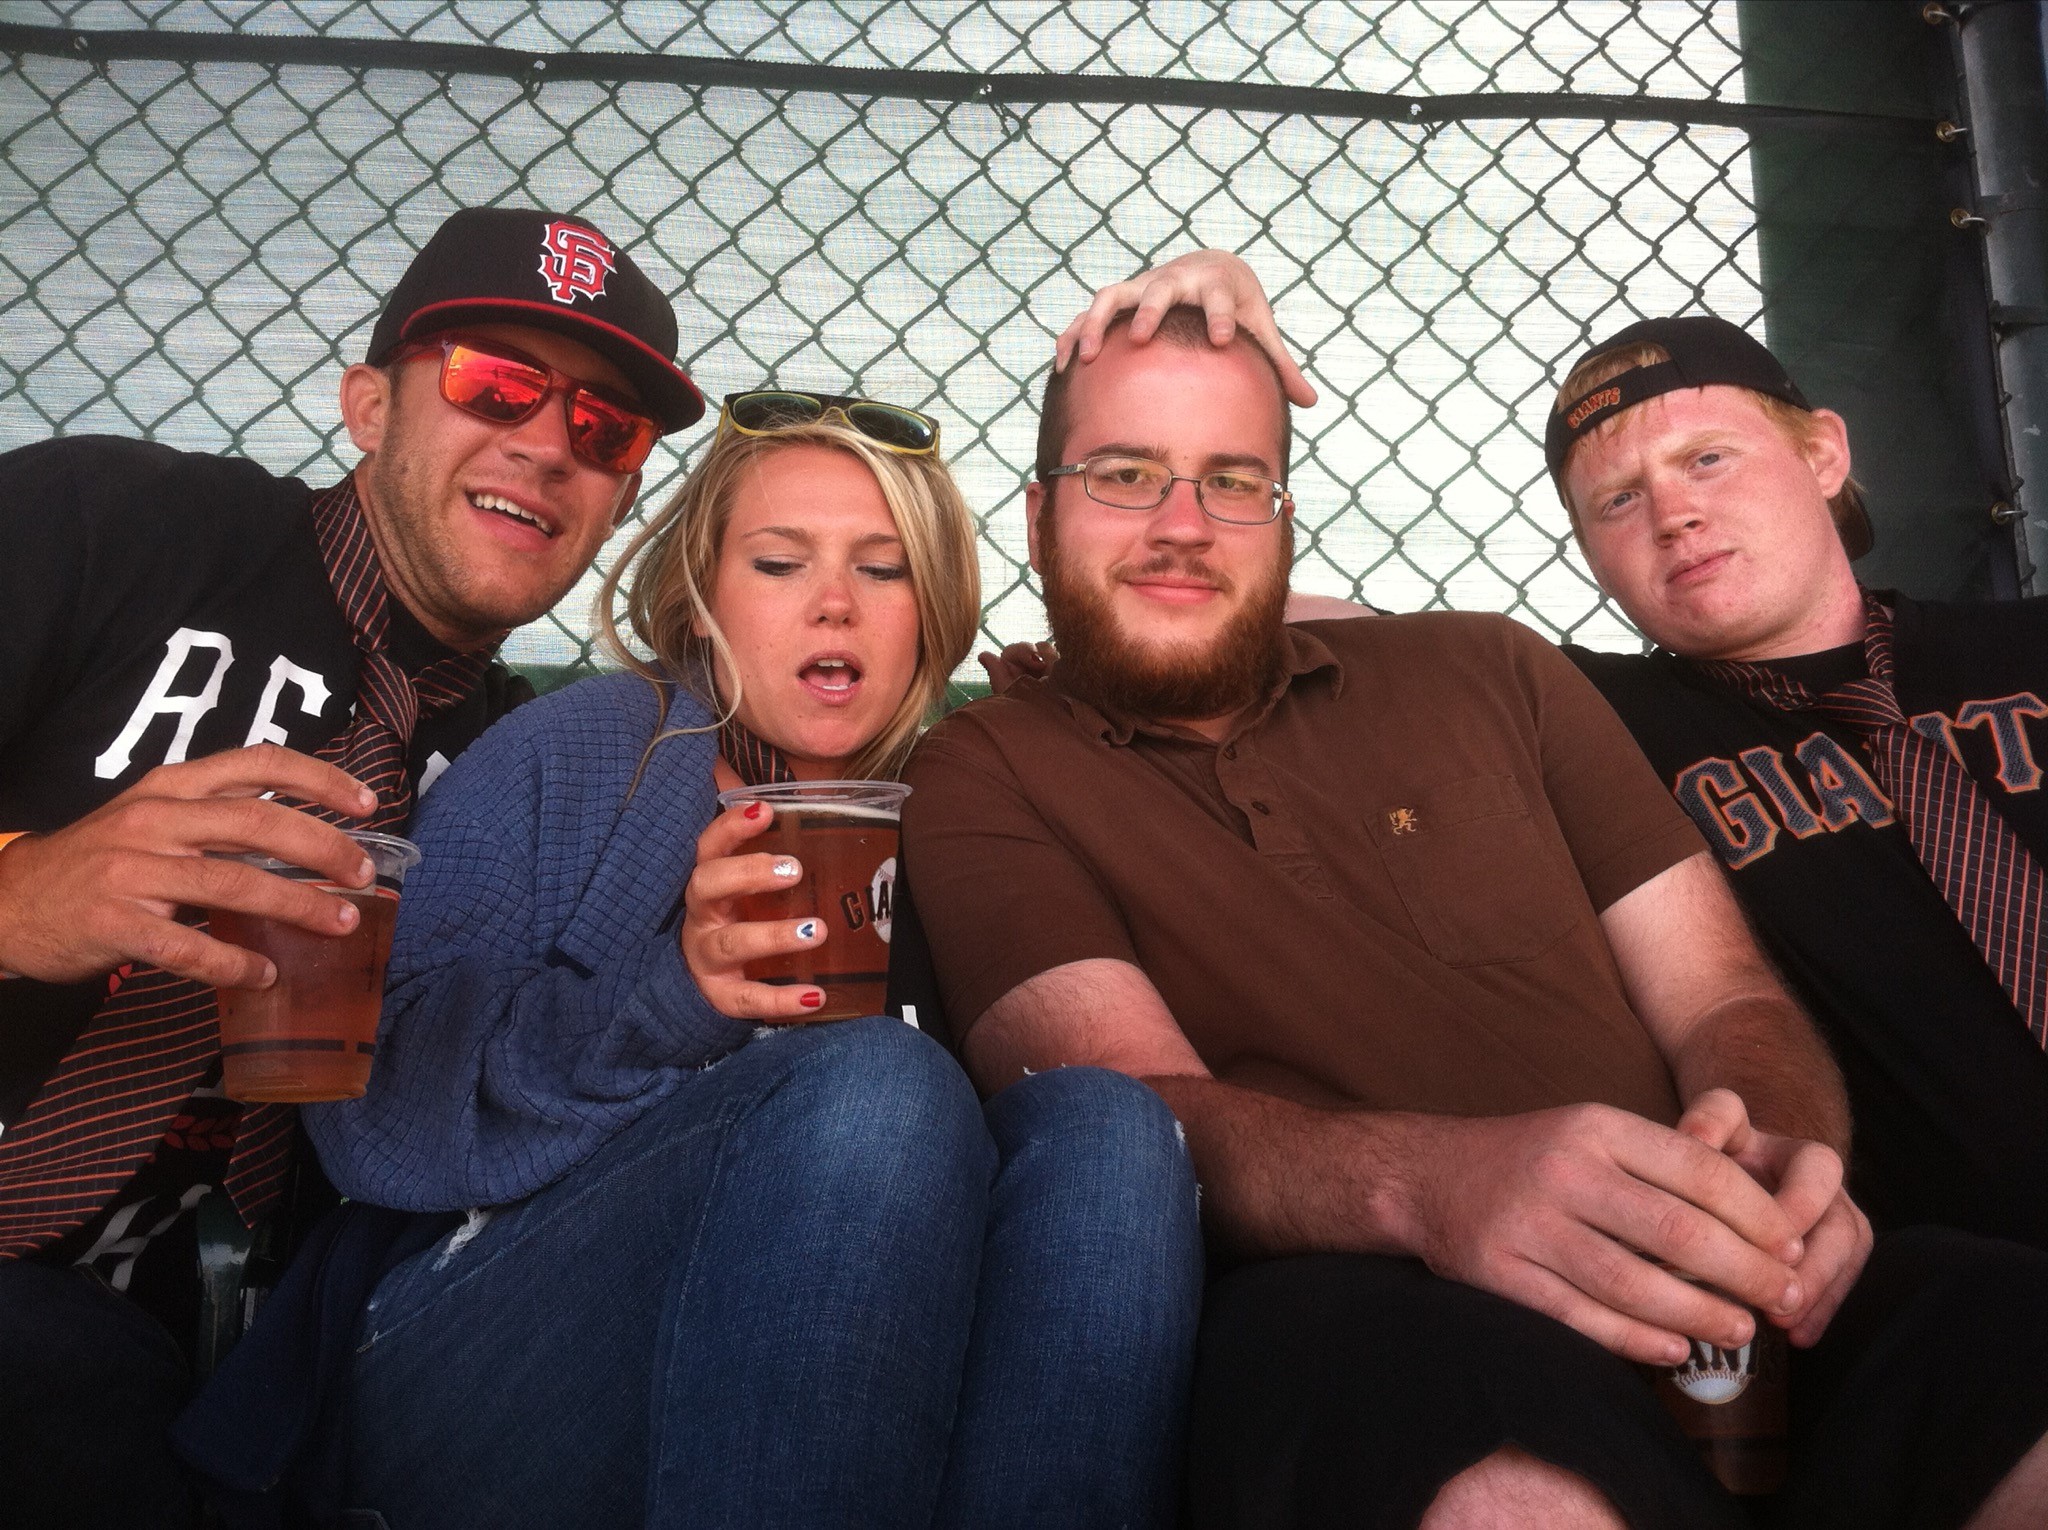 PHOTO: From left, Melvin Riffel, his wife, Brittney, his brother, Bennett Riffel at a San Francisco Giants baseball game. Melvin and Bennett Riffel are among those killed in the Ethiopian Airlines crash on March 10, 2019.